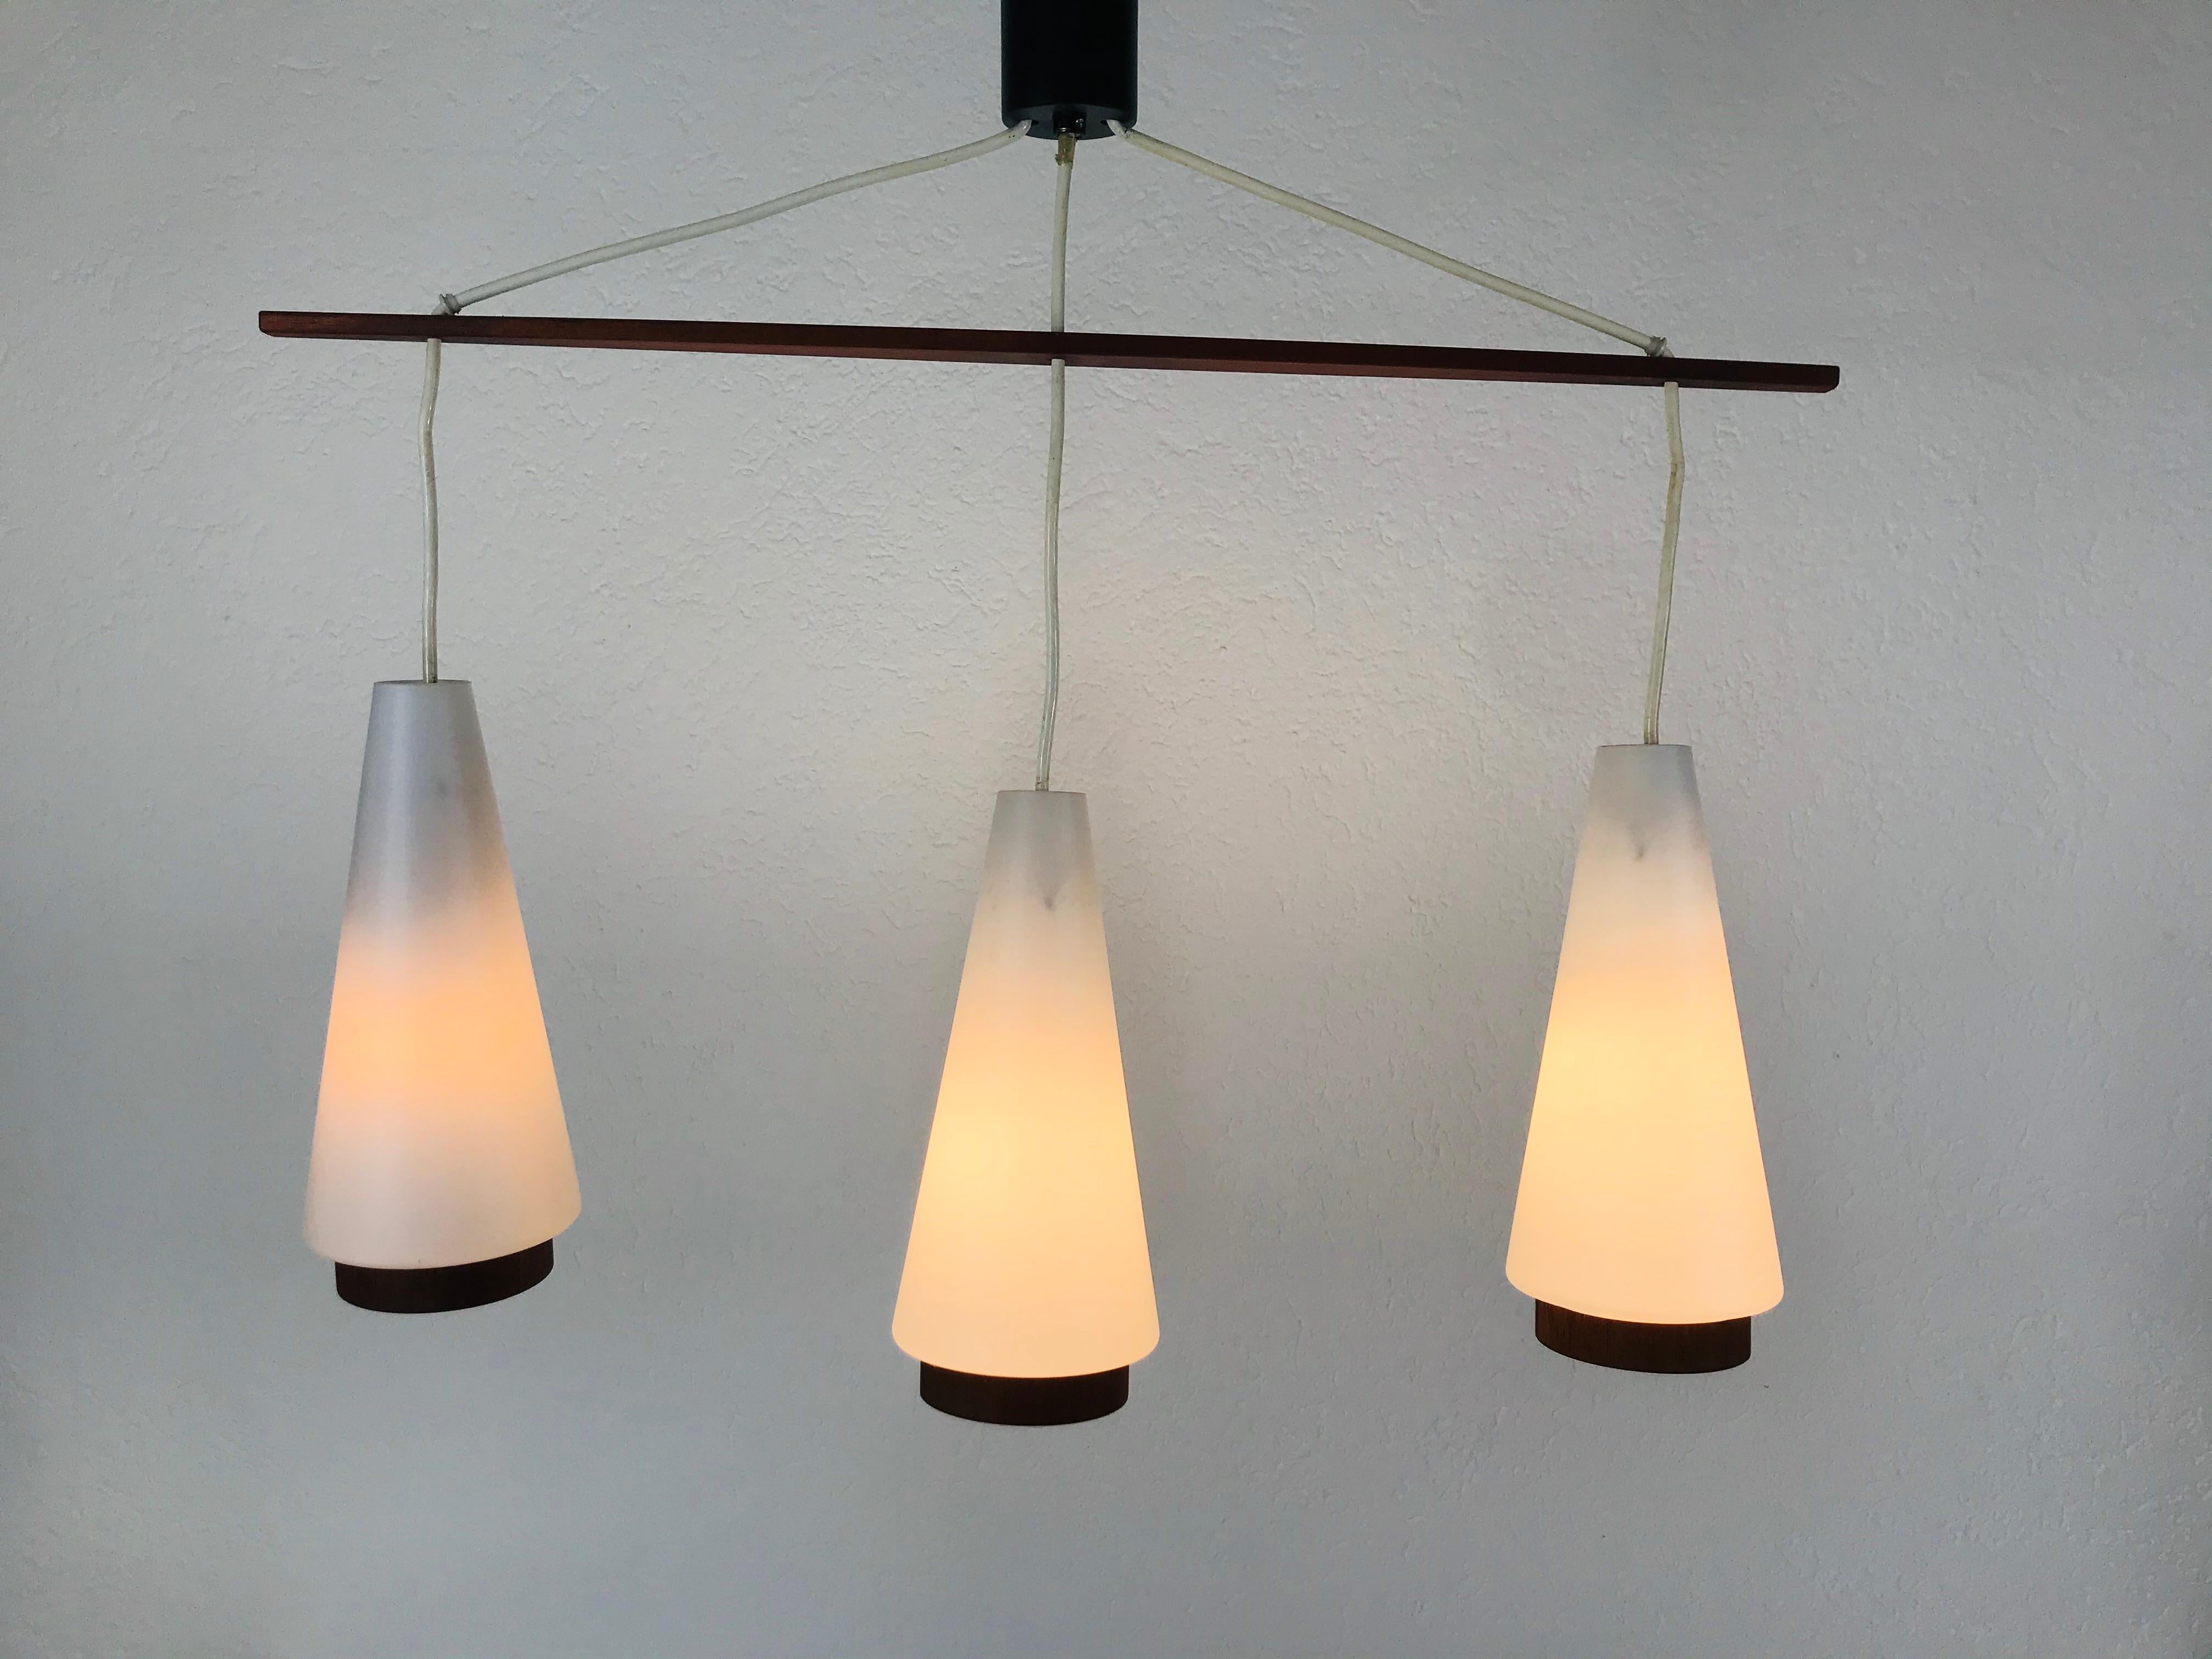 A teak and white opaline glass ceiling light made in the 1960s. Three glass shades secure to the teak body. The glass shade is made of thin opaline glass and has cylinder shape. The lamp has a Scandinavian design.

The light requires three E27